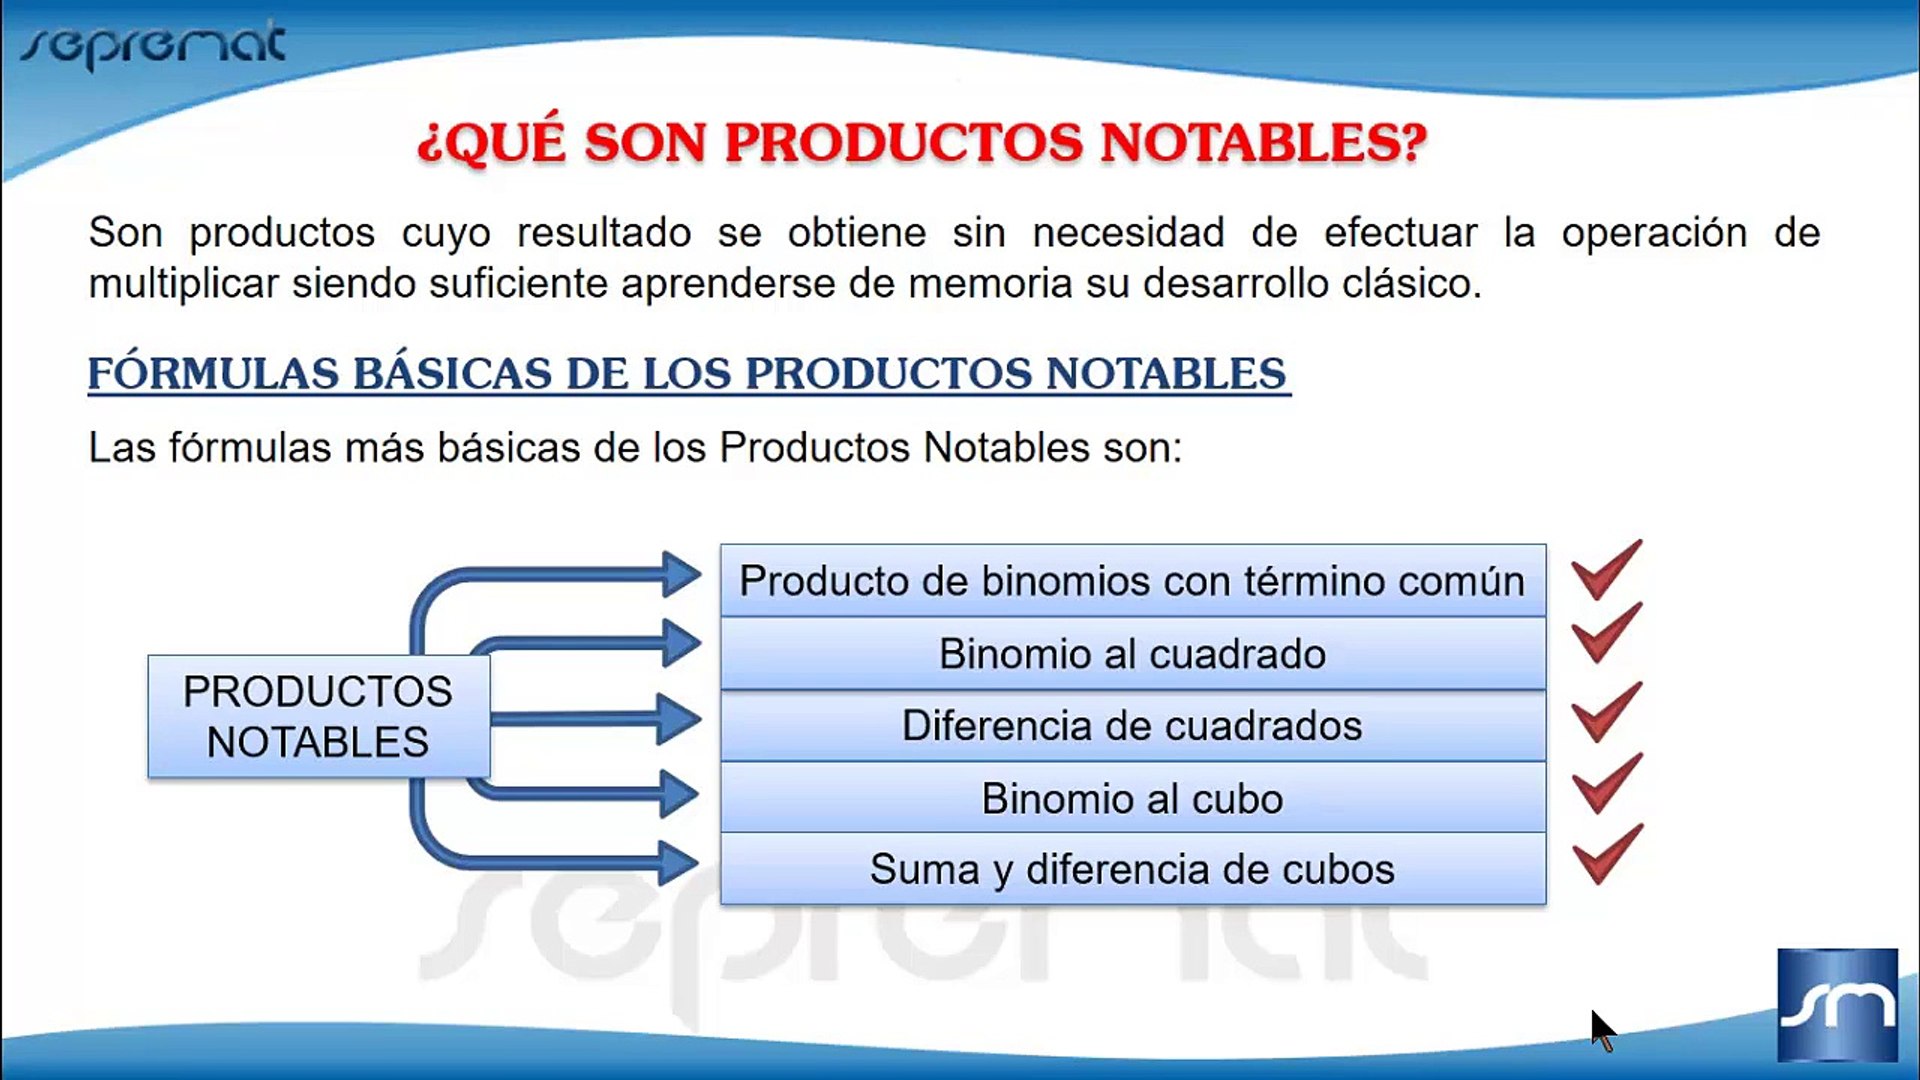 PRODUCTOS NOTABLES 1 - Vídeo Dailymotion